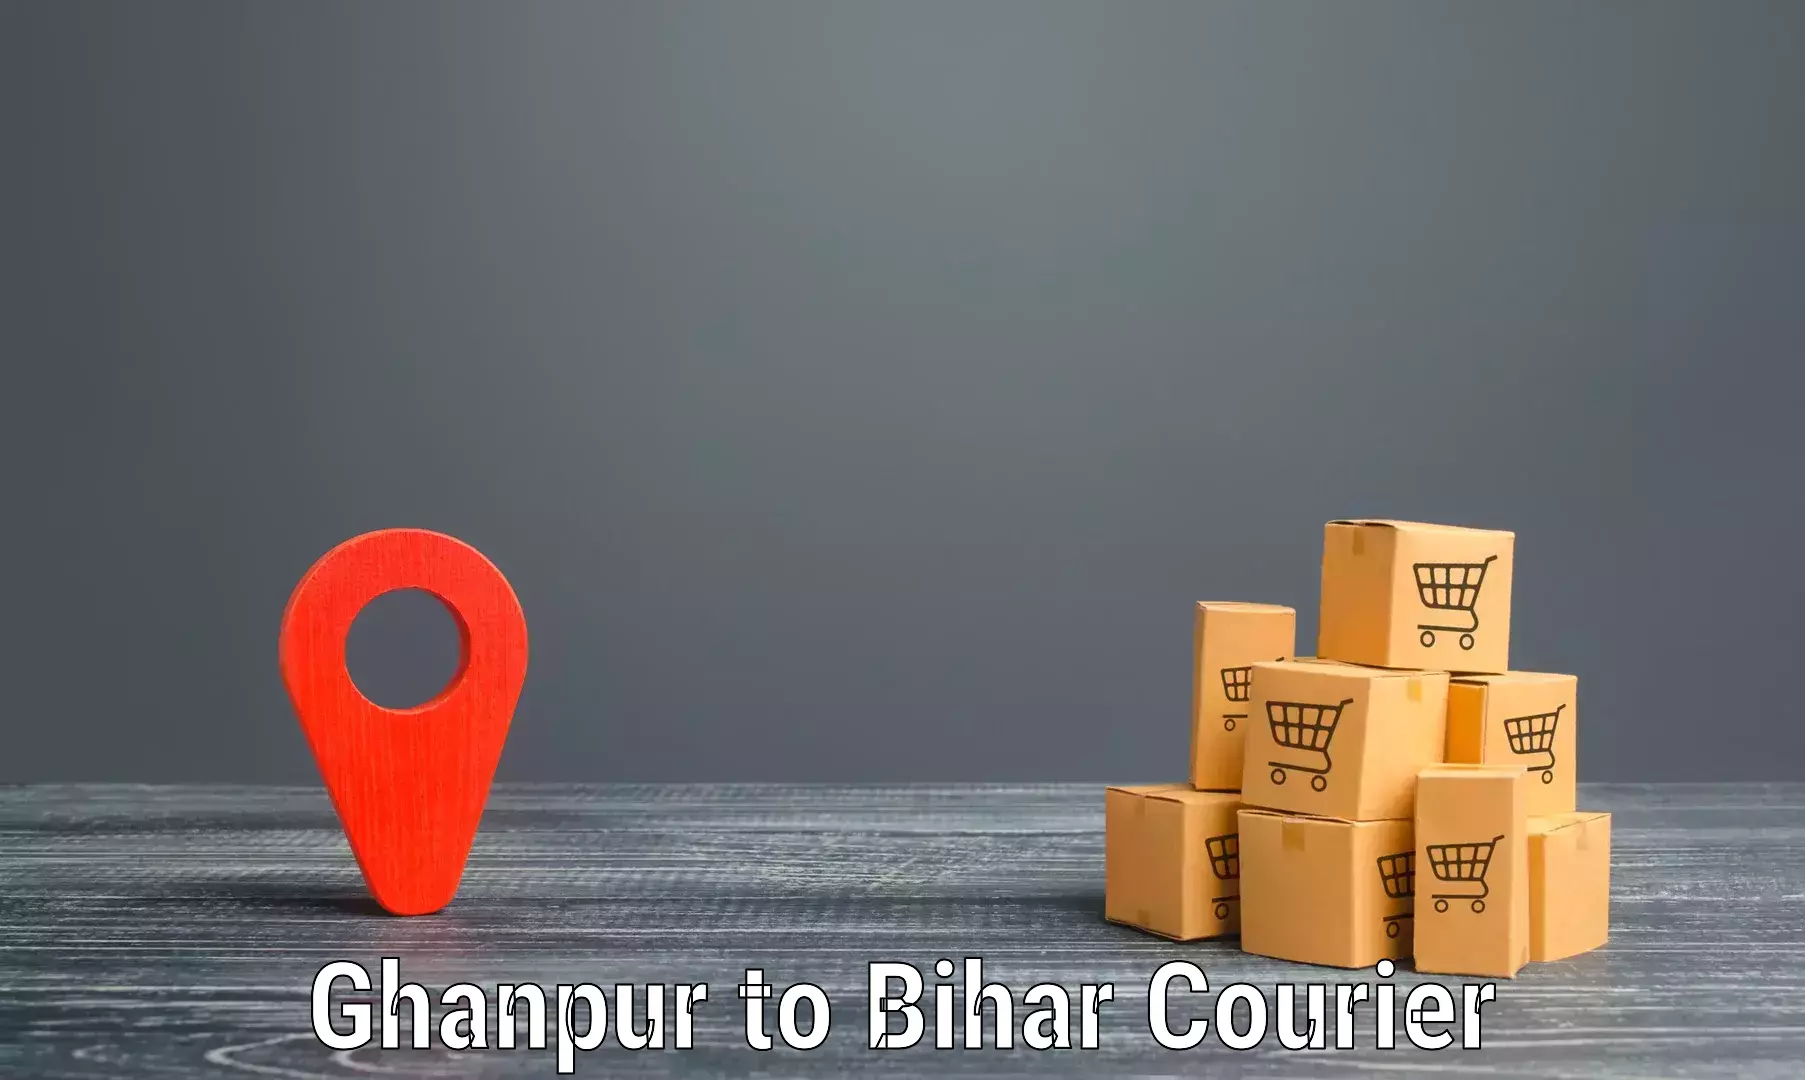 Automated parcel services Ghanpur to Darbhanga